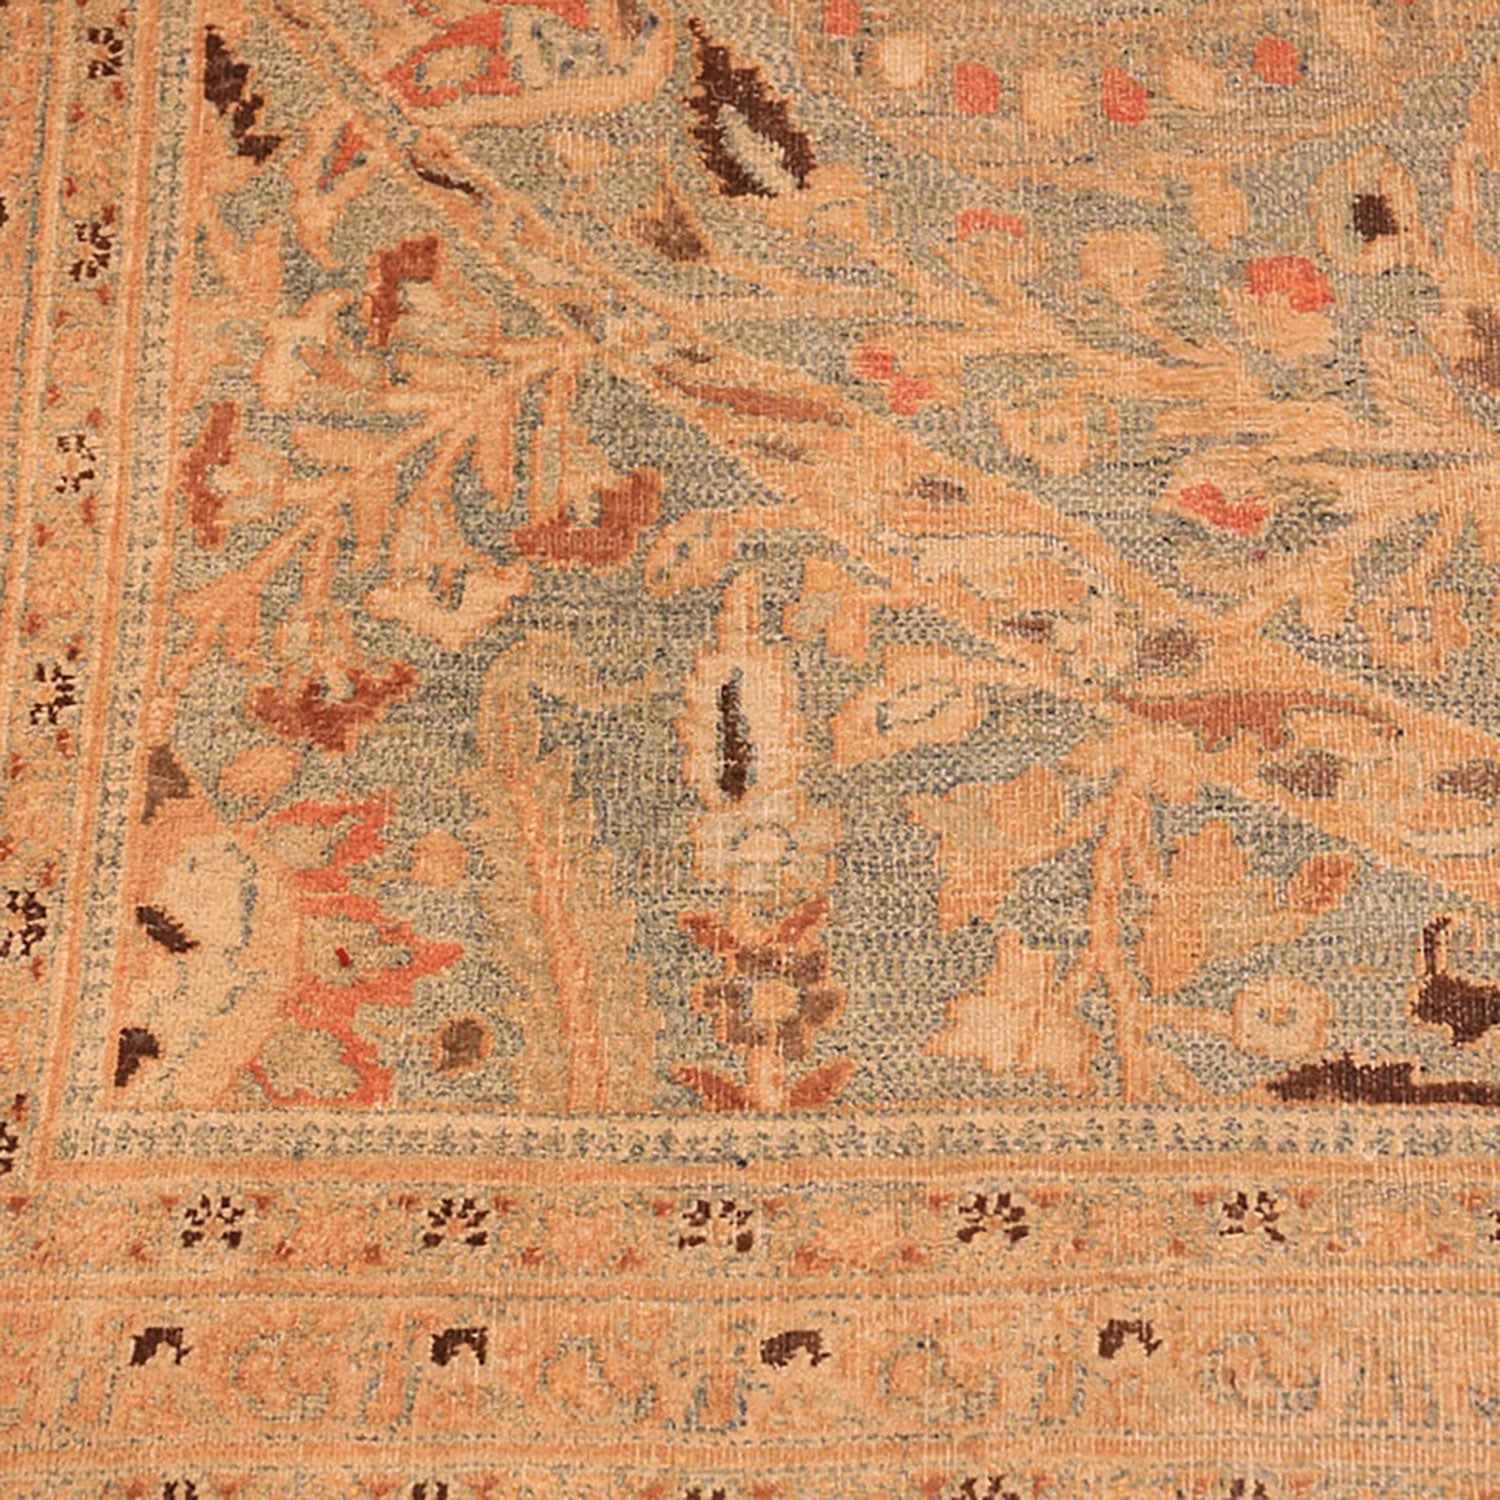 Intricately patterned rug with floral motifs, showcasing skilled craftsmanship.